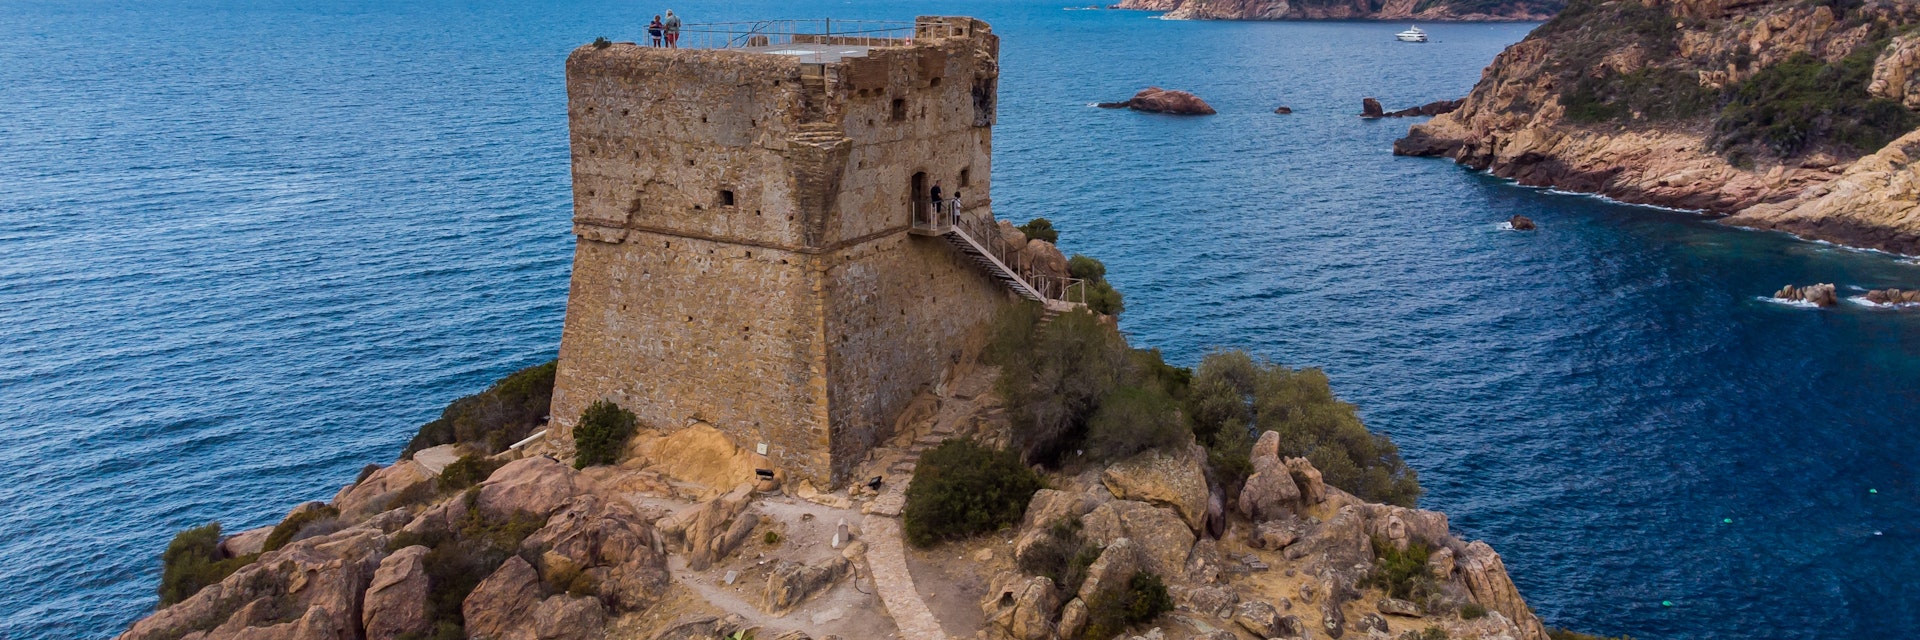 Aerial view of the ruins of the square Genoese tower of Porto at the end of the Gulf of Porto, Corsica, France.